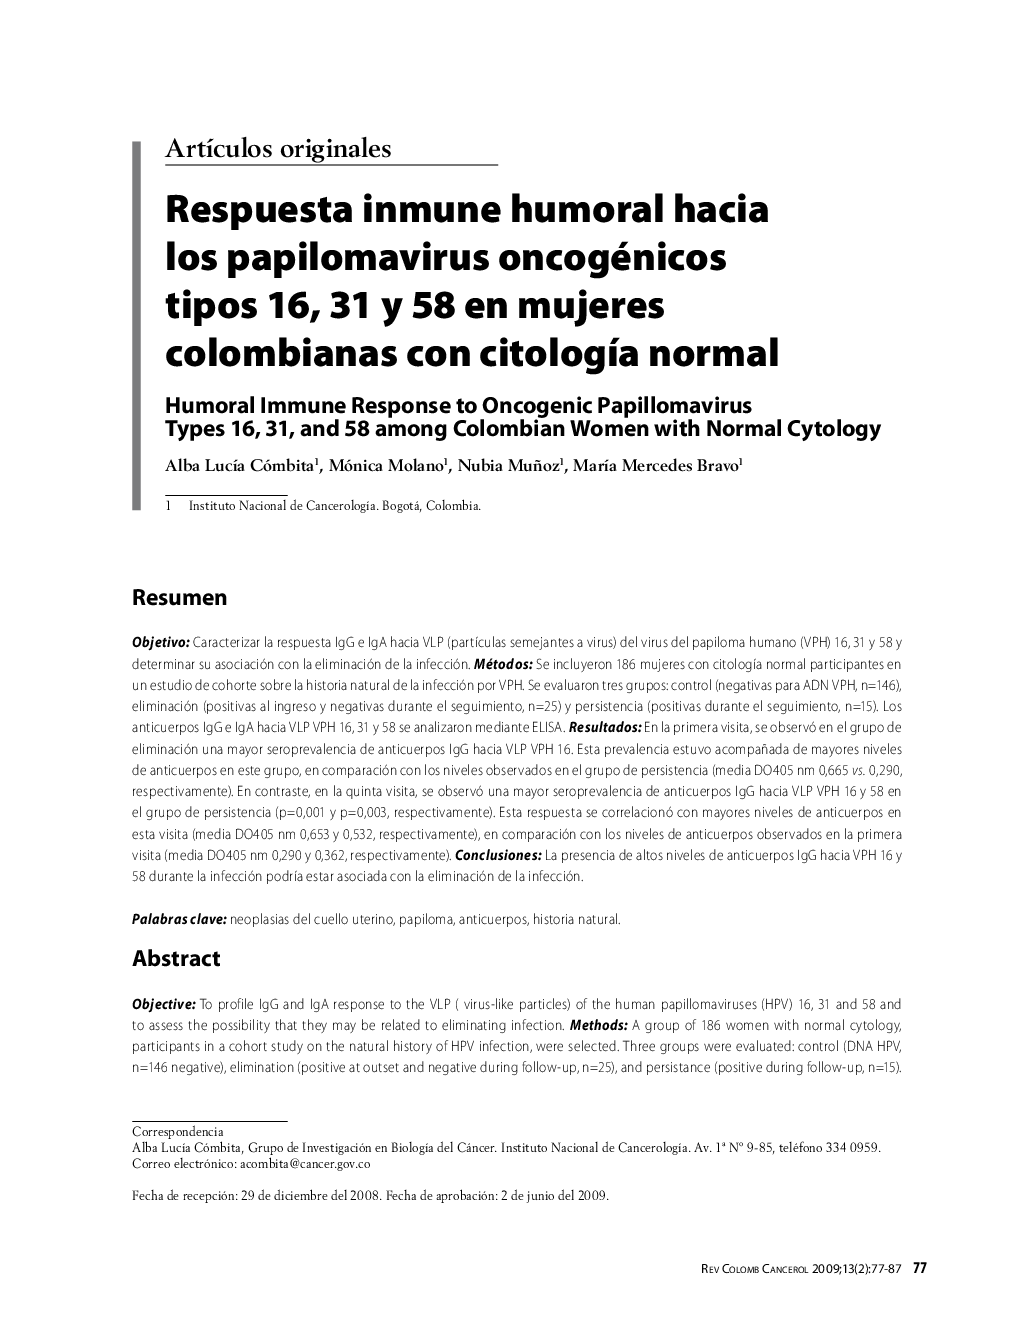 Respuesta inmune humoral hacia los papilomavirus oncogénicos tipos 16, 31 y 58 en mujeres colombianas con citologÃ­a normalHumoral Immune Response to Oncogenic Papillomavirus Types 16, 31, and 58 among Colombian Women with Normal Cytology